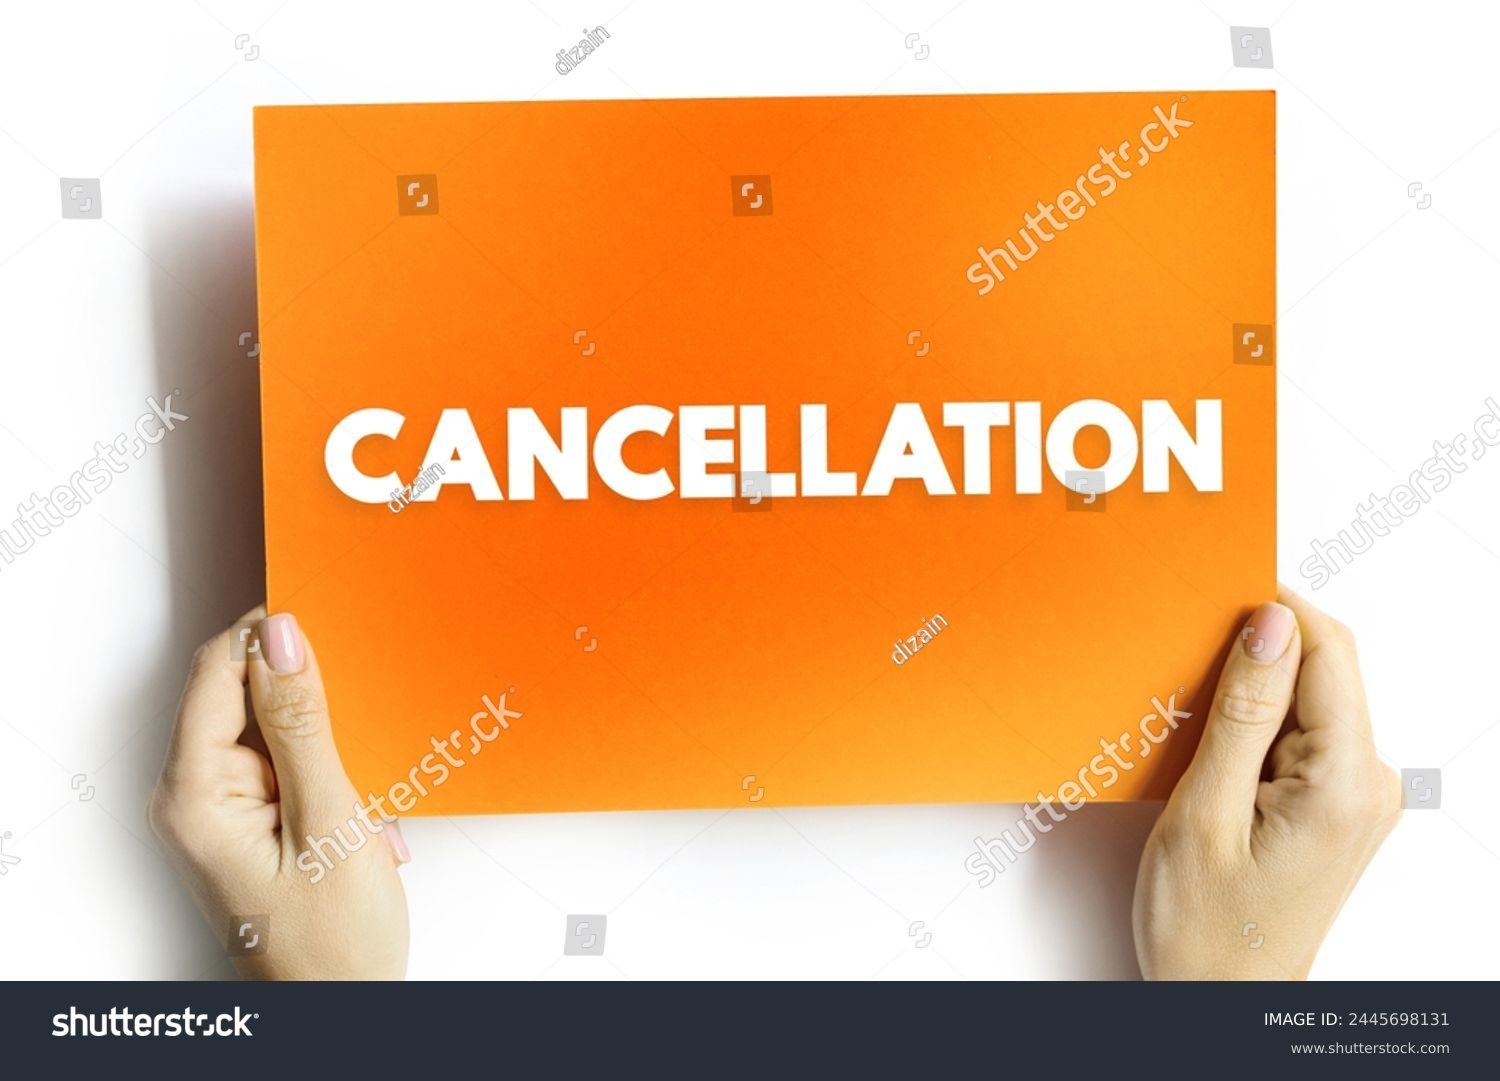 Cancellation - the action of cancelling something, text concept on card #2445698131